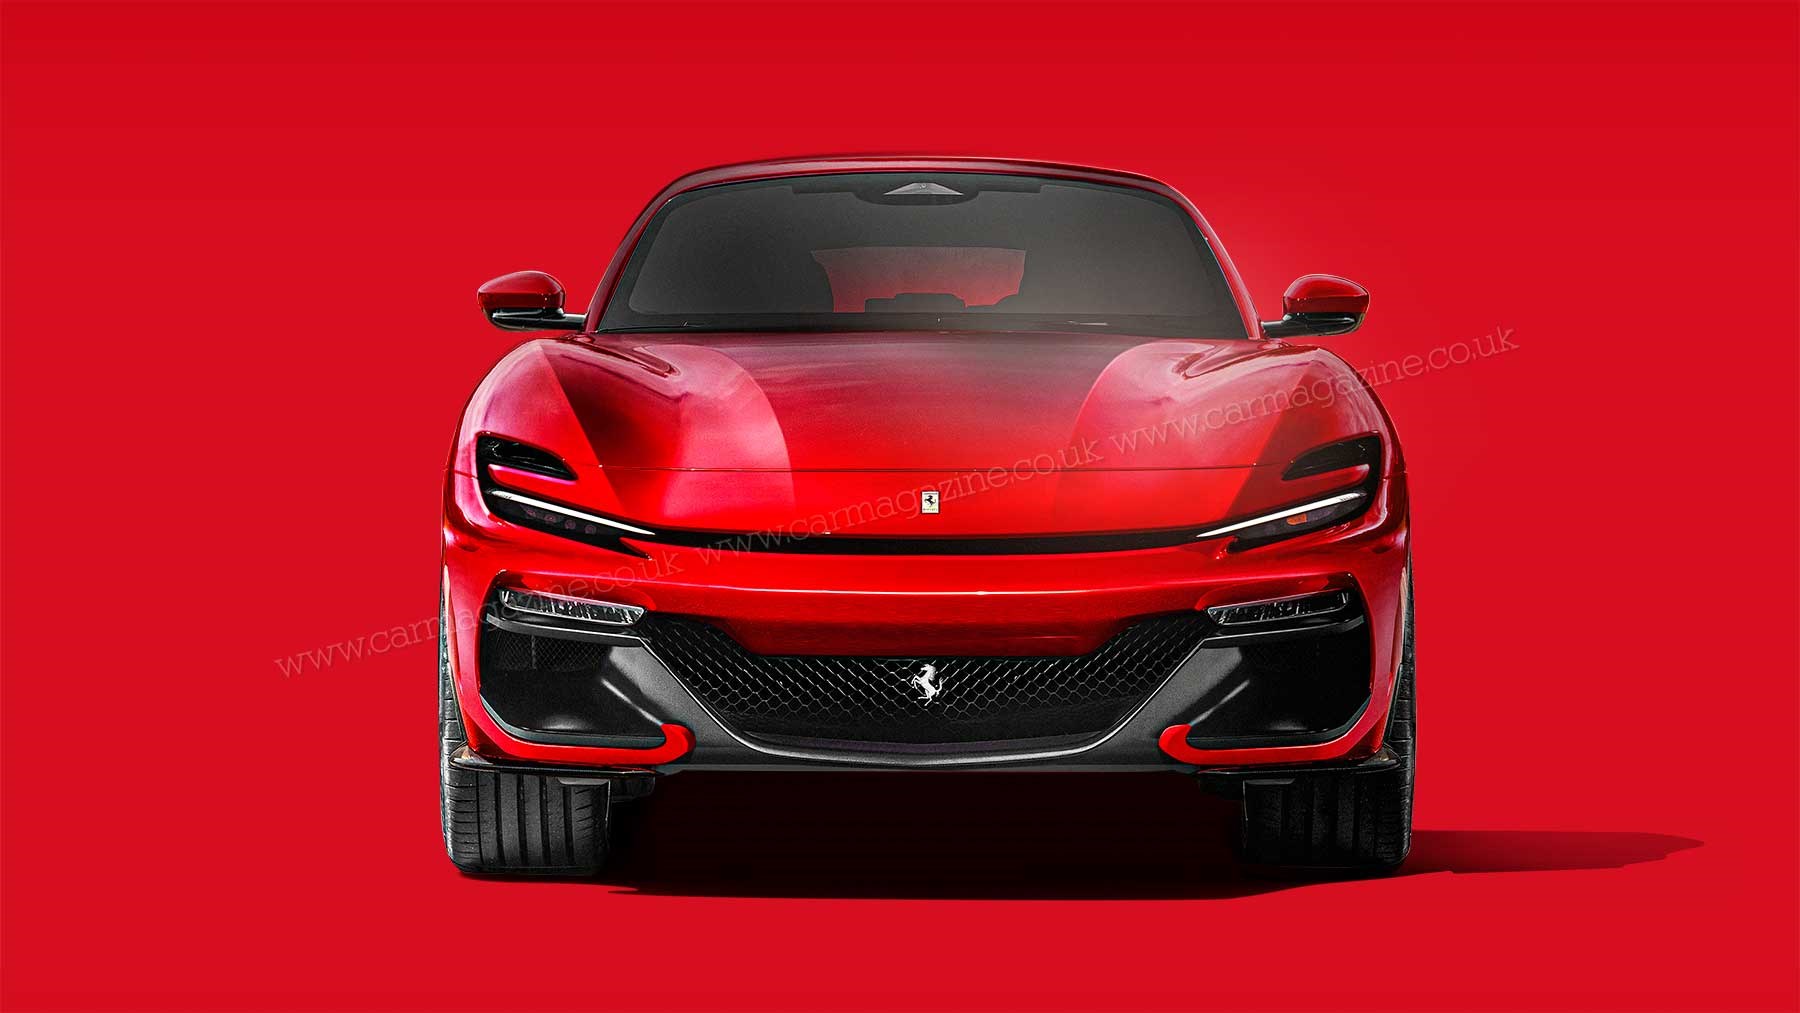 Ferrari has a good reason for staying away from all-electric cars